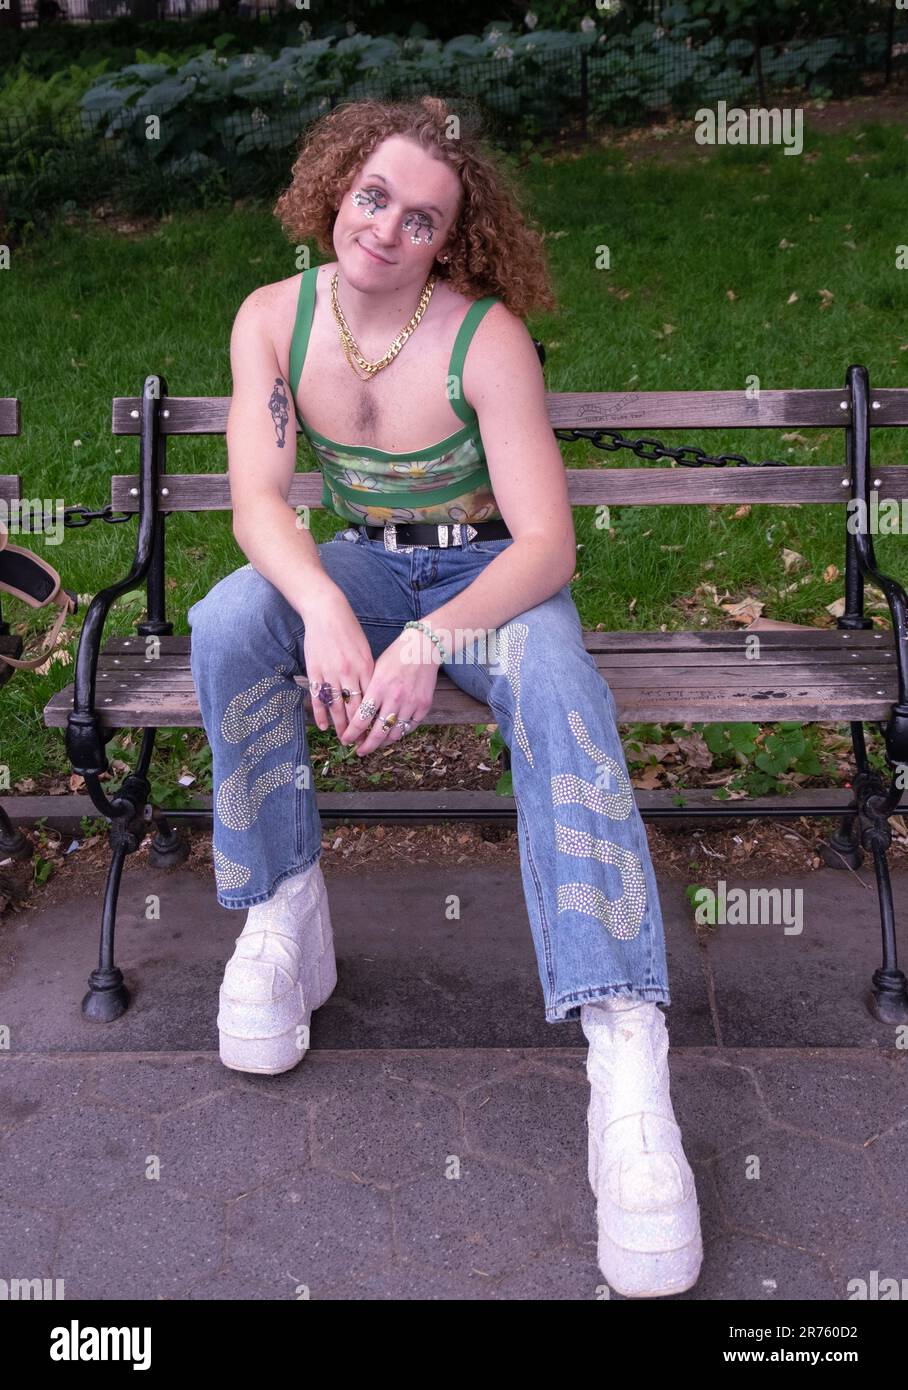 A young man with an individual fashion style and who identifies as he/him poses for a photo in Washington Square Park in Manhattan, New York City. Stock Photo